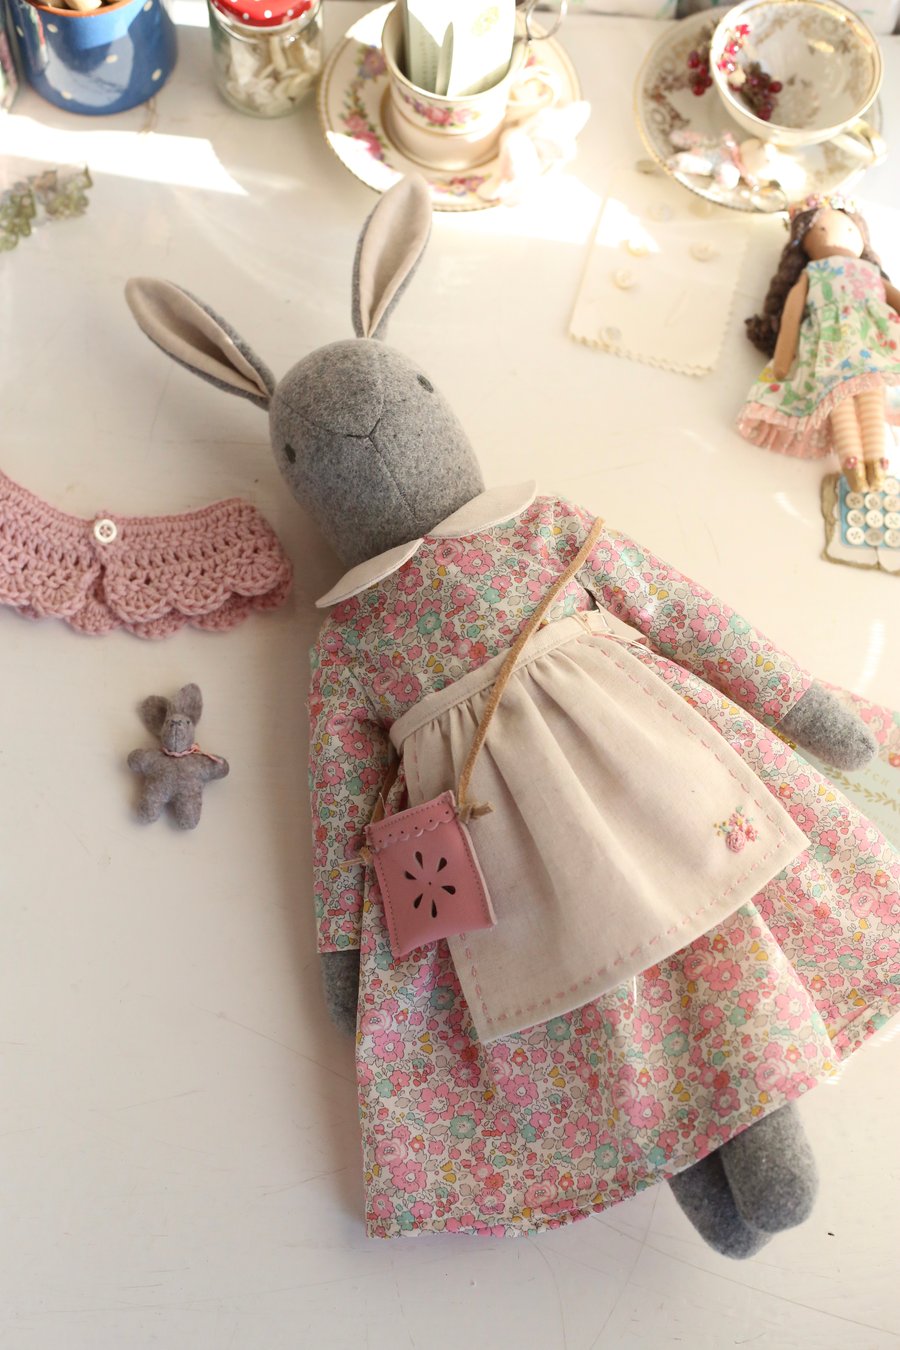 Reserved listing for Ann - Heirloom Liberty bunny Betsy Ann pink